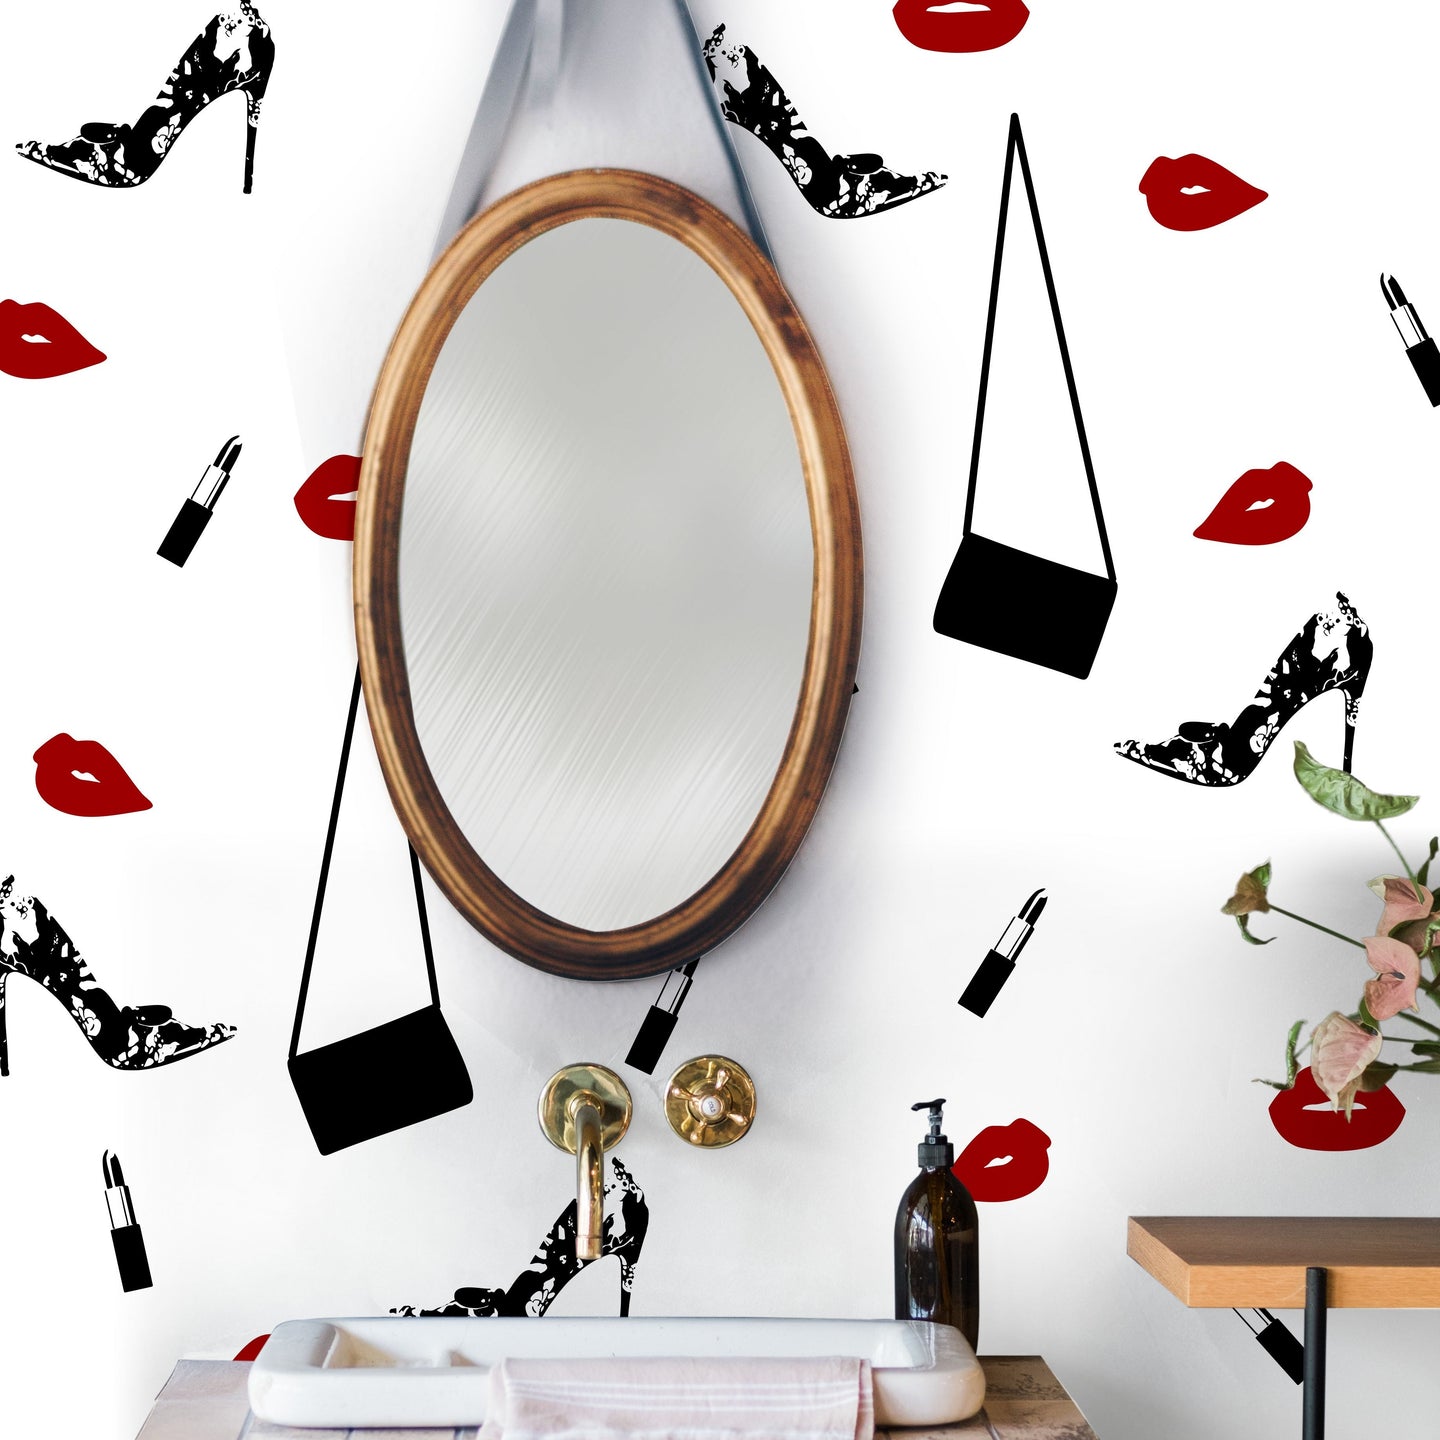 Elevate Your Living Space with Fashionable and Customizable Wall Decals - Perfect for Rentals and Dormitories - Unique Designs by Skilled Artists to Add Glamour and Elegance to Your Home or Salon - 55 pieces